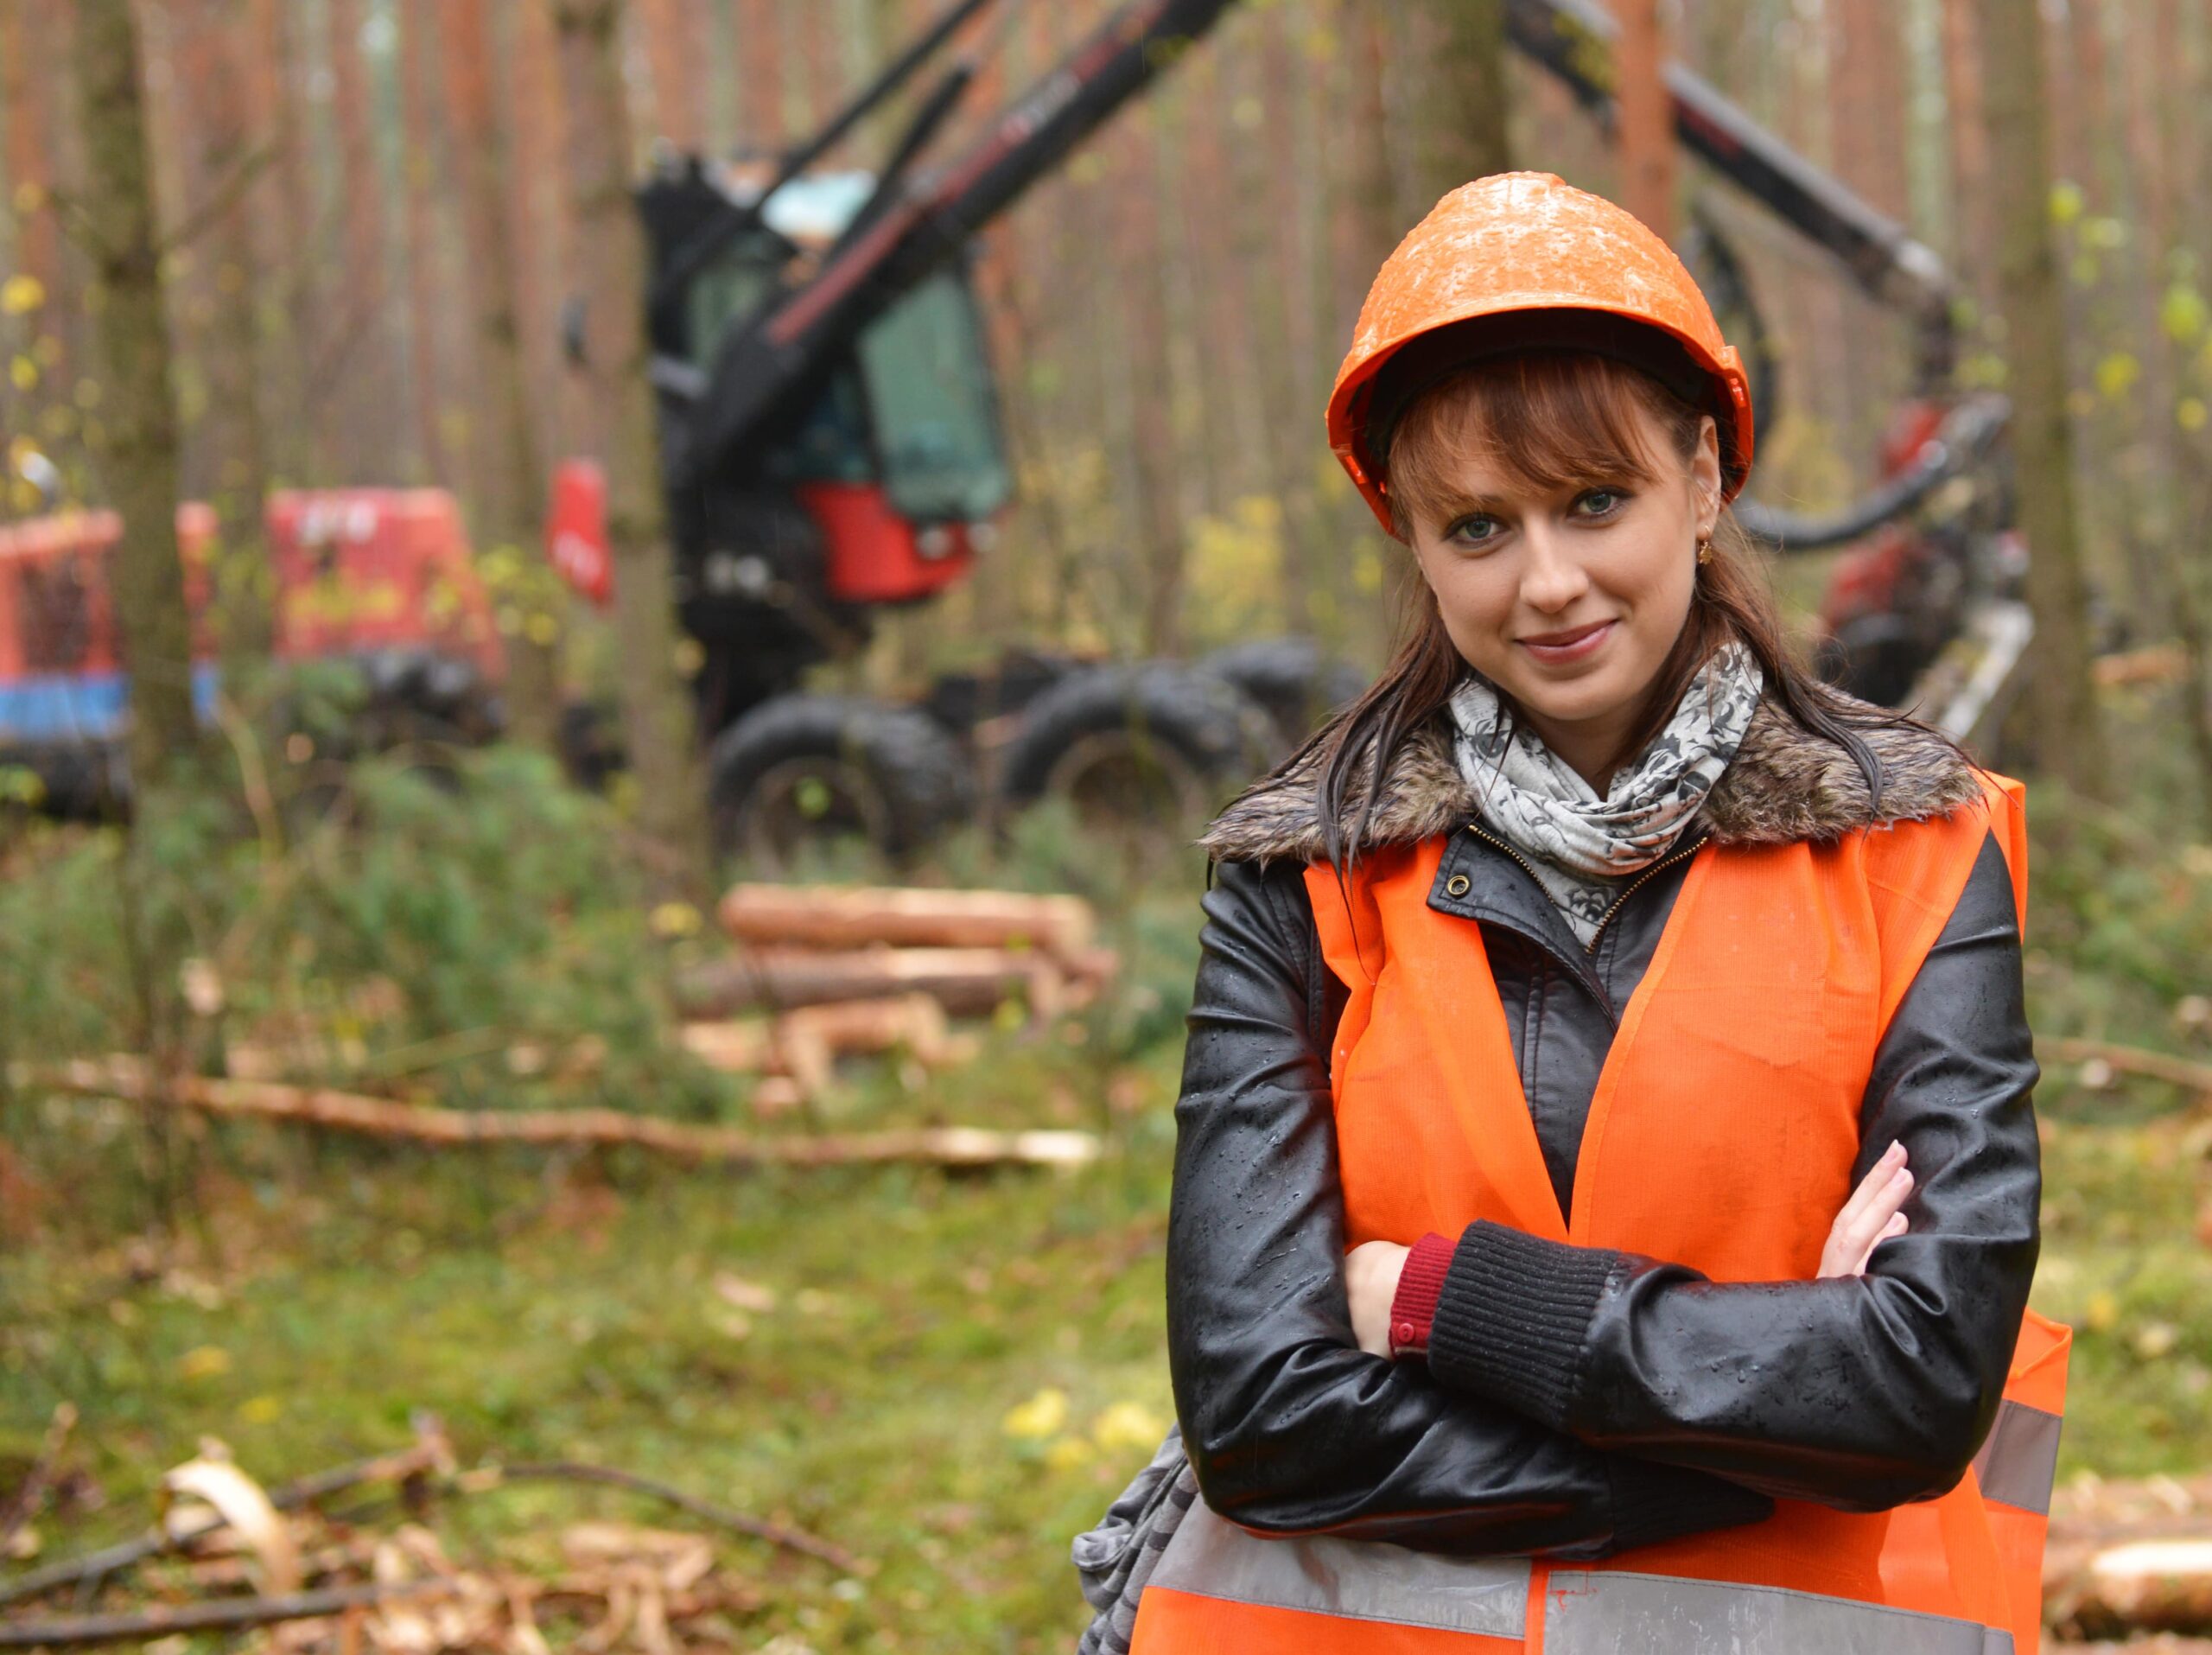 A female forestry worker